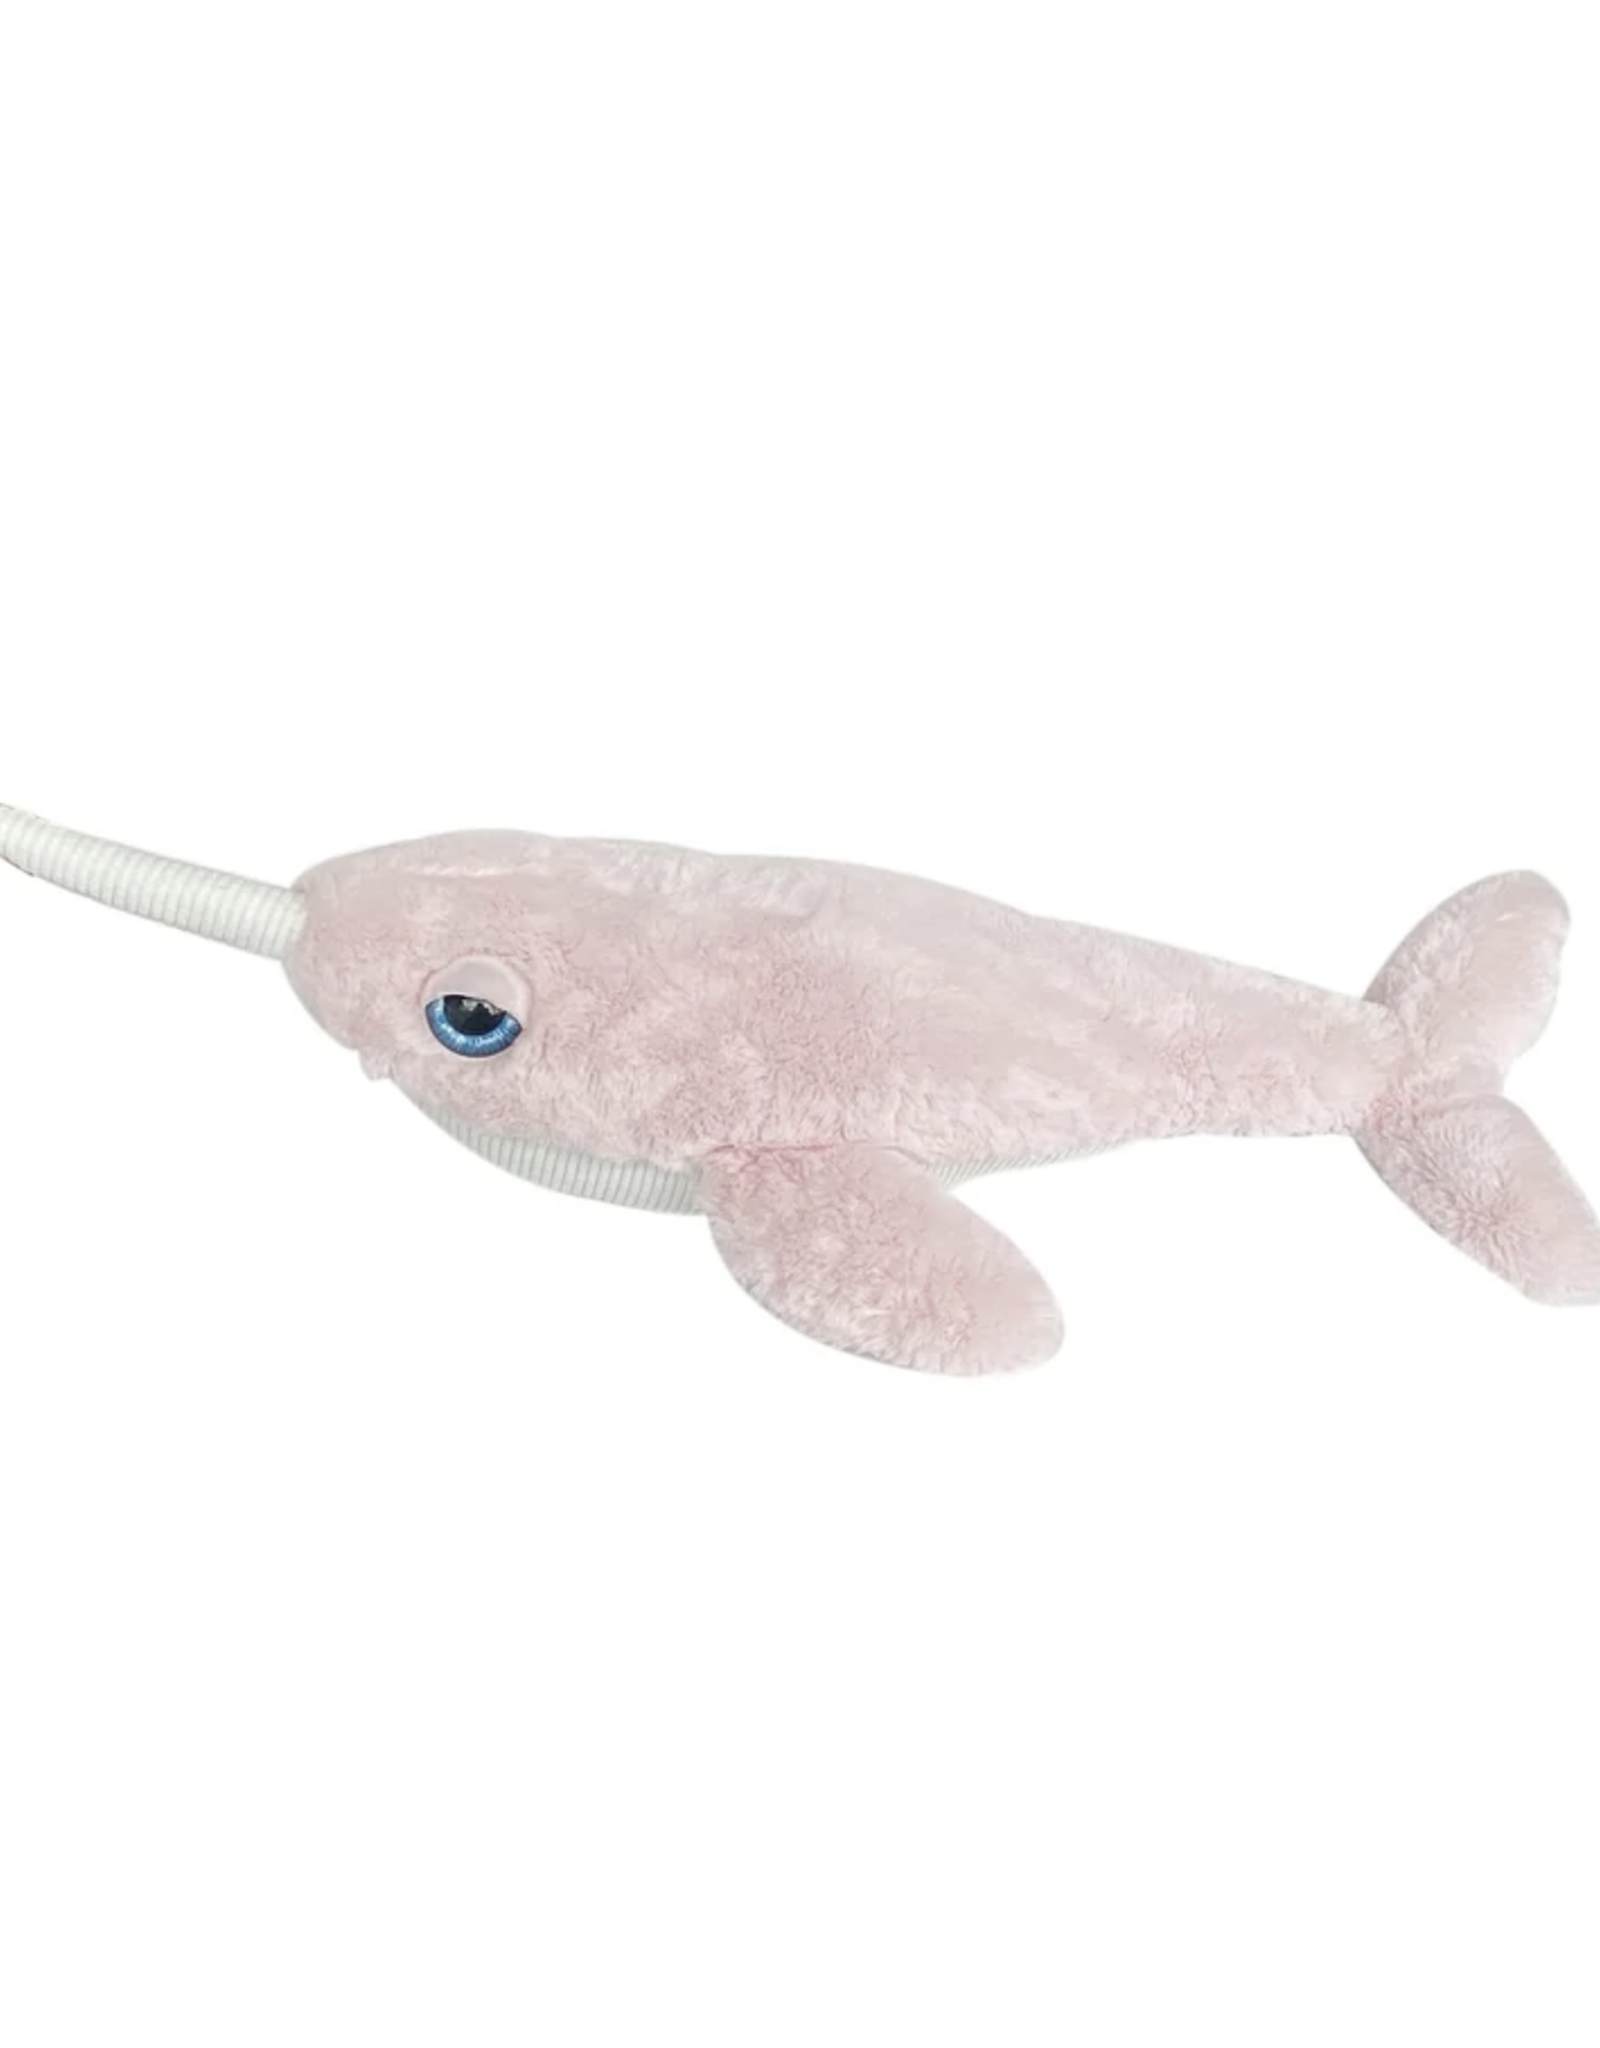 Holly Narwhal Plush Toy